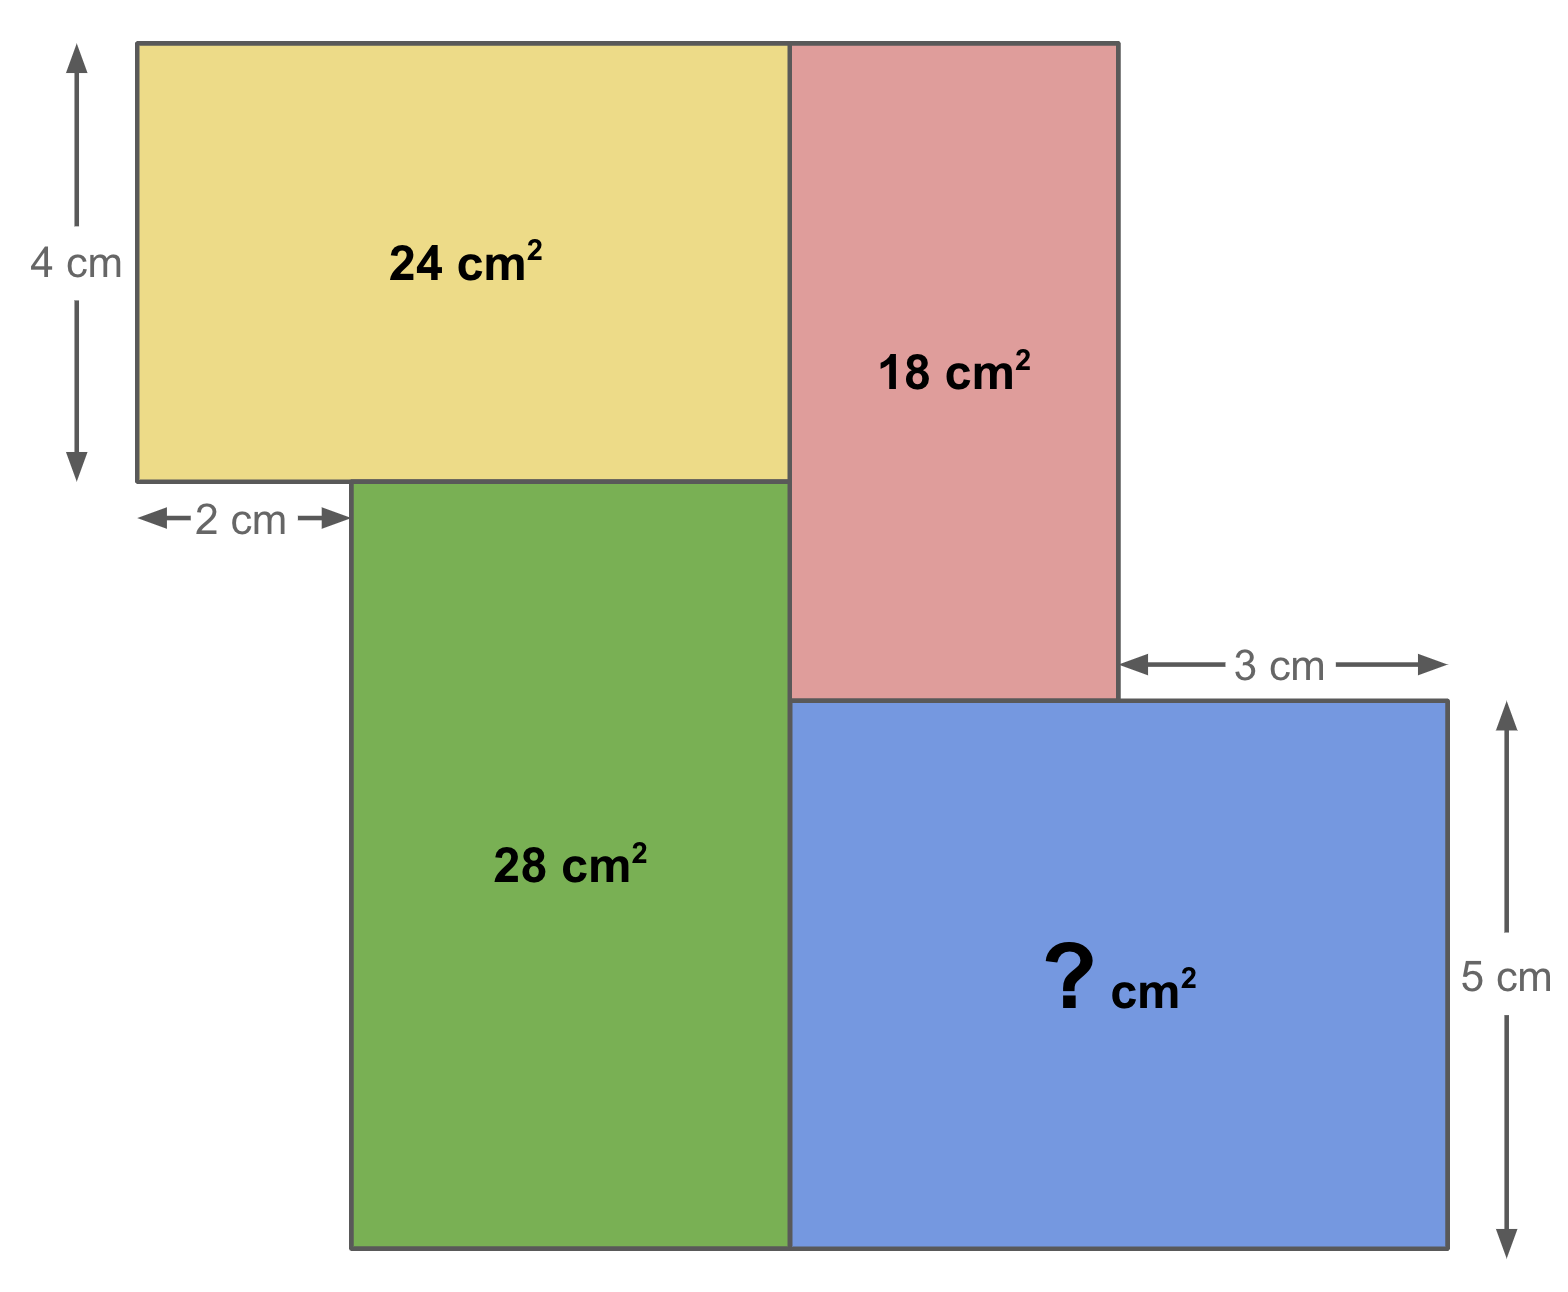 Four rectangles are connected to form a Z shape. The yellow rectangle in the top left corner, above the green rectangle and left of the red rectangle. It has a labelled area of 24 square cm, its left side is labelled with a length of 4 cm, and its bottom side that sticks out past the green rectangle is labelled with a length of 2 cm. The smallest, red rectangle is in the top left corner, above the blue rectangle and right of the yellow rectangle. It has a labelled area of 18 square cm, and none of its side lengths are labelled. The green rectangle is in the bottom left corner, underneath the yellow rectangle and right of the blue rectangle. It has a labelled area of 28 square cm, and none of its side lengths are labelled. The blue rectangle is in the bottom right corner, right of the green rectangle and below the red rectangle. Its unknown area is labelled with a question mark, its right side is labelled with a length of 5 cm, and its top side that sticks out past the red rectangle is labelled with a length of 3 cm.